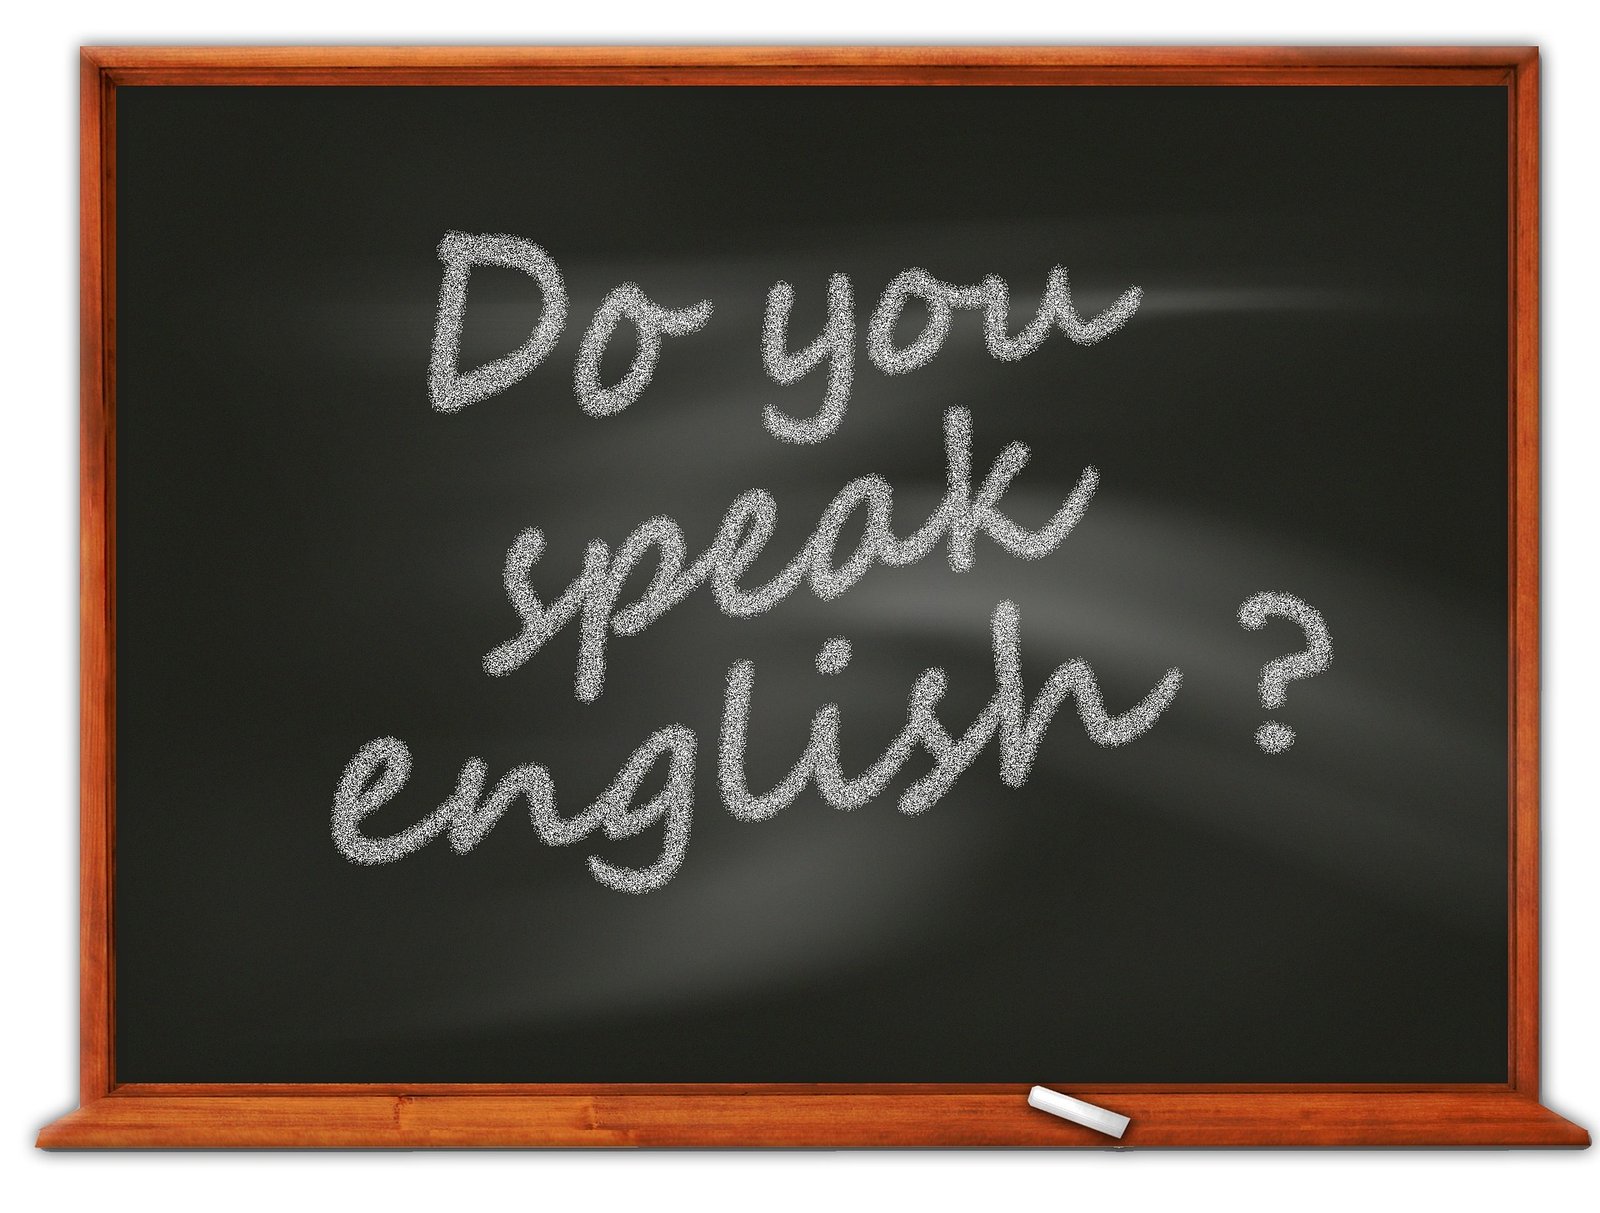 Why use an English speaking lawyer in Spain?